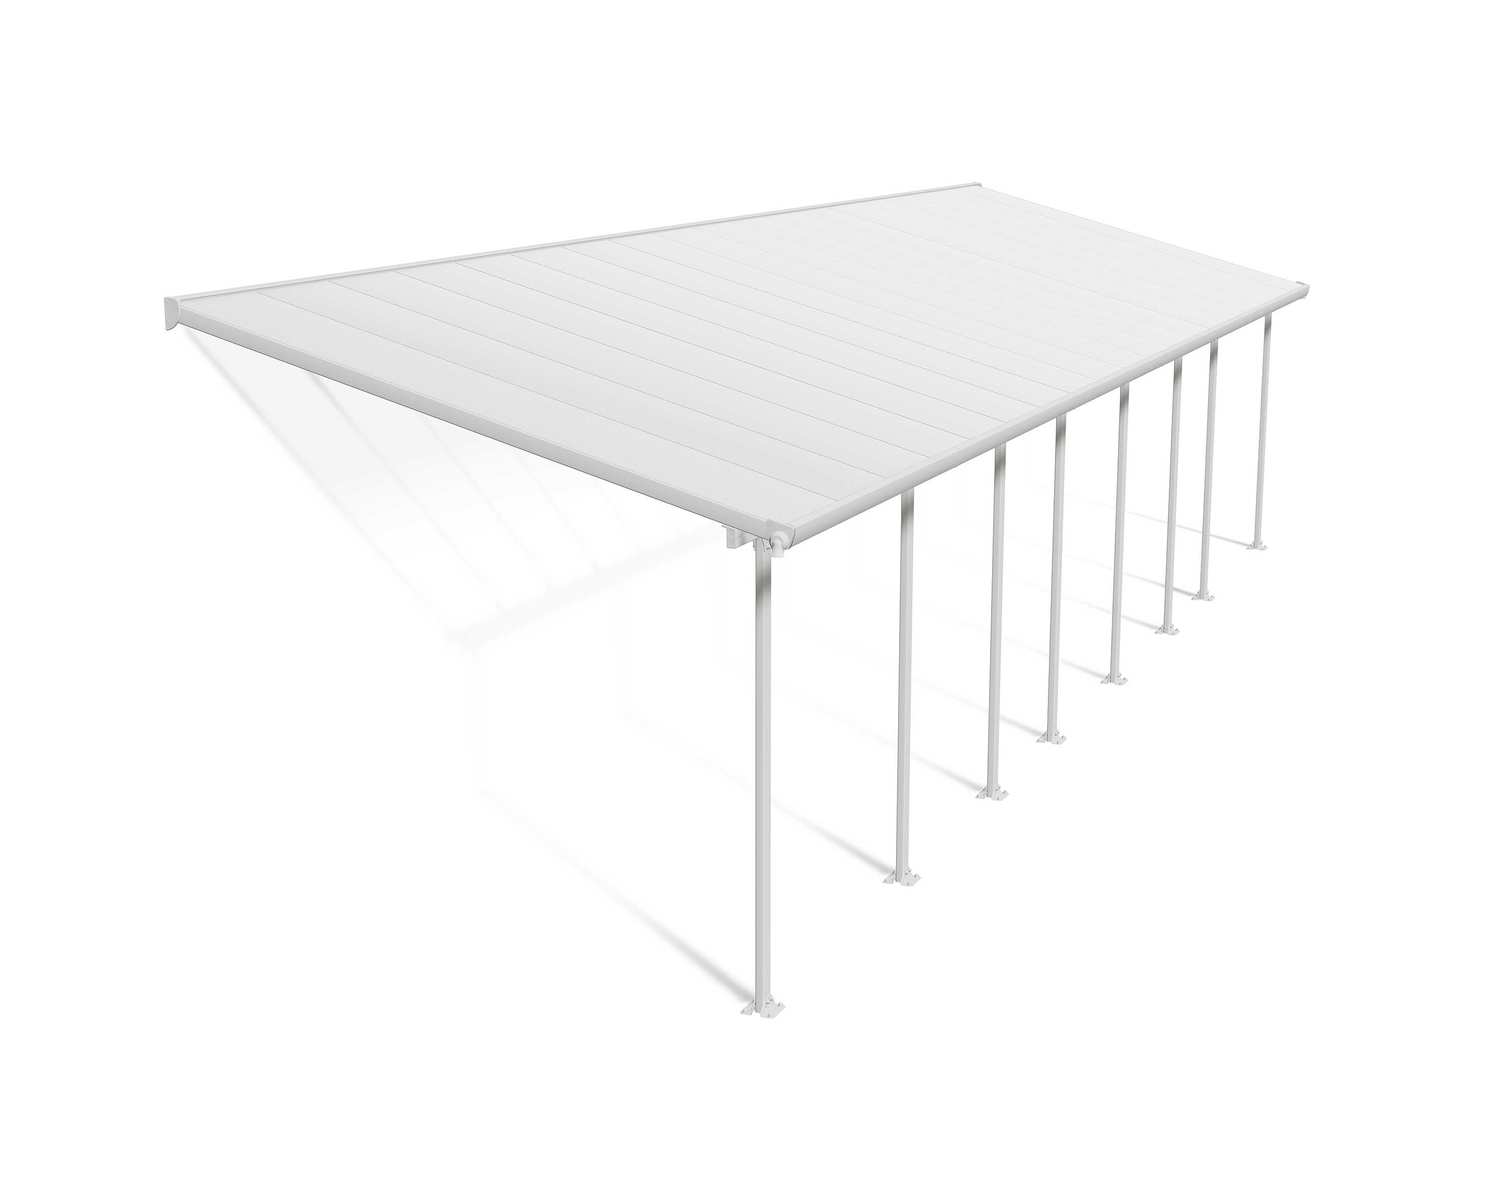 Patio Cover Kit Feria 3 ft. x 11.56 ft. White Structure & White Multi Wall Glazing